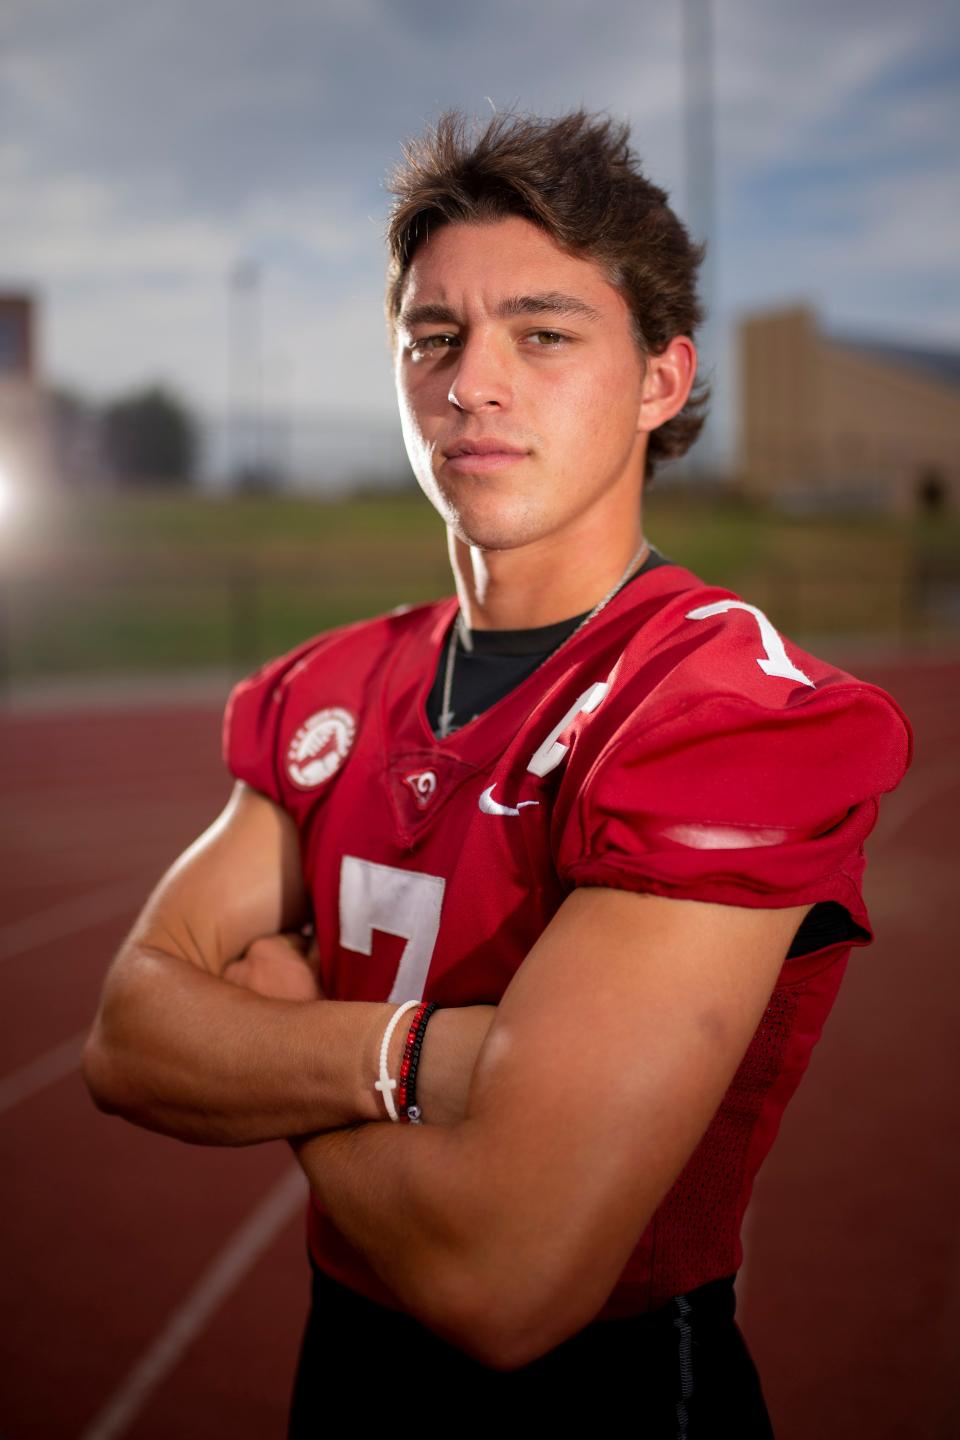 Cole Adams is No. 5 on The Oklahoman’s 2023 Super 30 rankings for the state’s top high school football recruits. He is committed to Alabama.